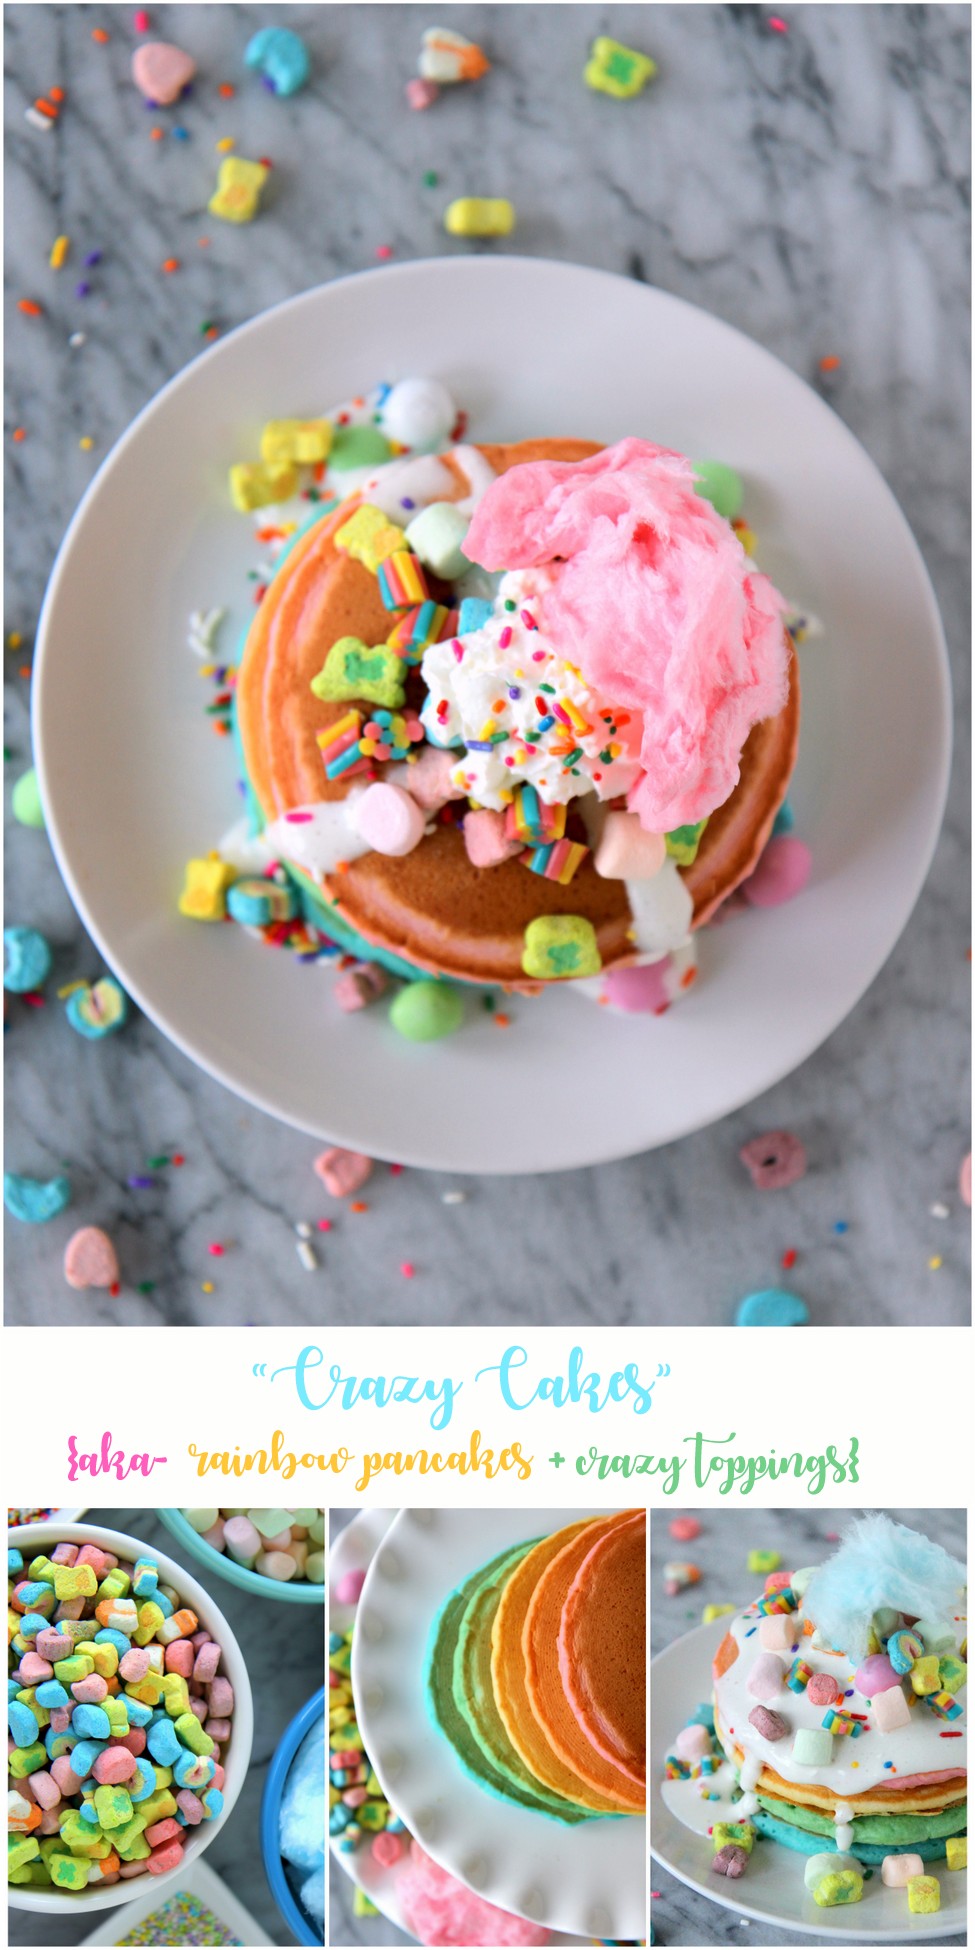 The perfect pancakes for a big (dessert) celebration (aka "crazy cakes")... a stack of rainbow pancakes with a pile of wild toppings!